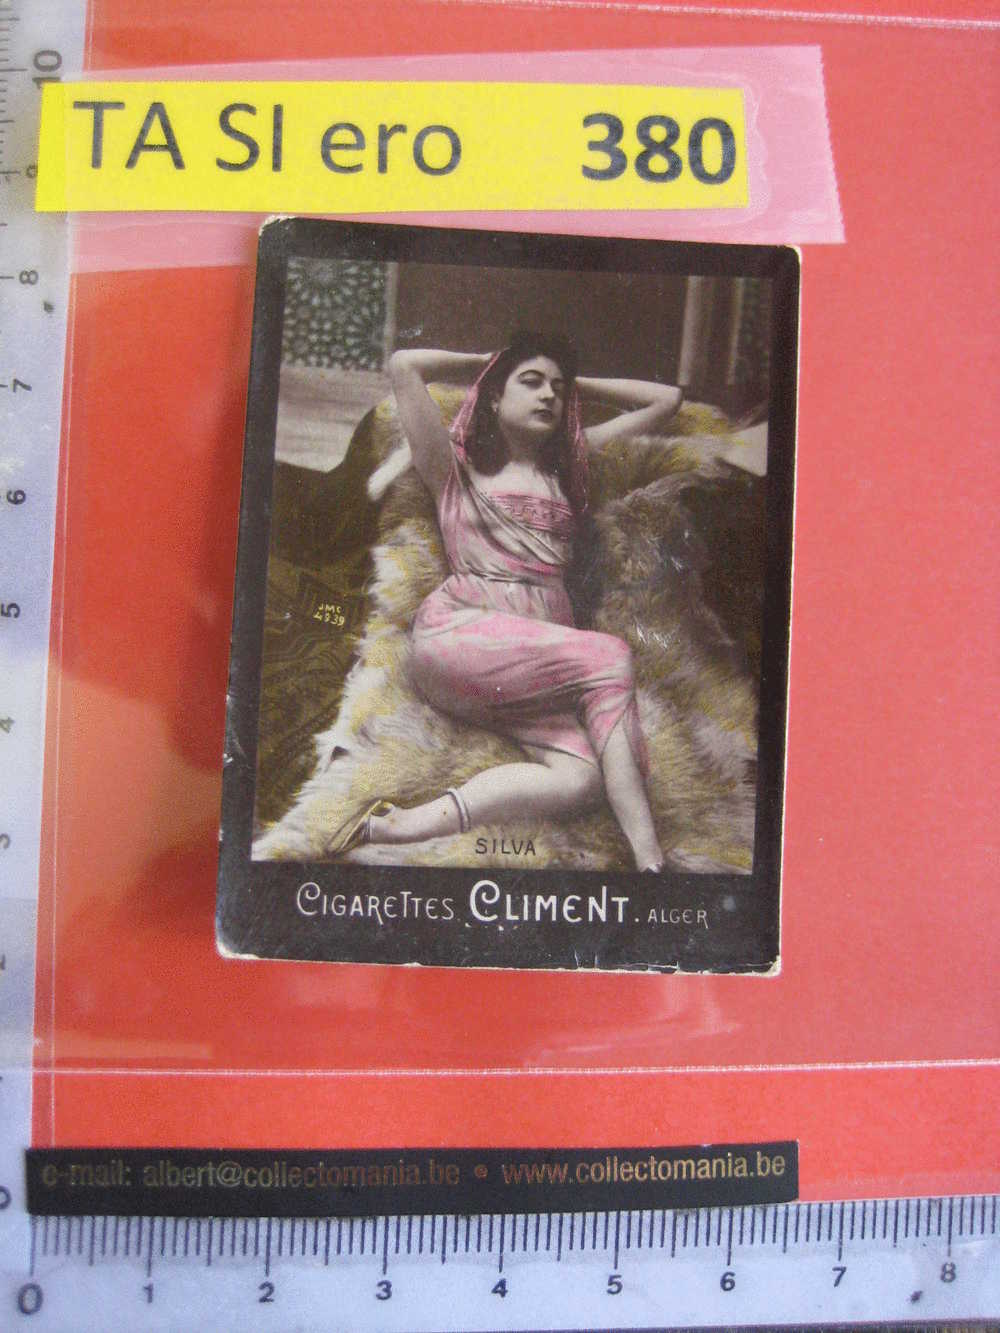 SILVA - JMC 4939    -   CLIMENT    Erotic EROTIQUE Carte REAL PHOTO  Tobacco Card  ALGER Risqué Nue Naked - Other Brands